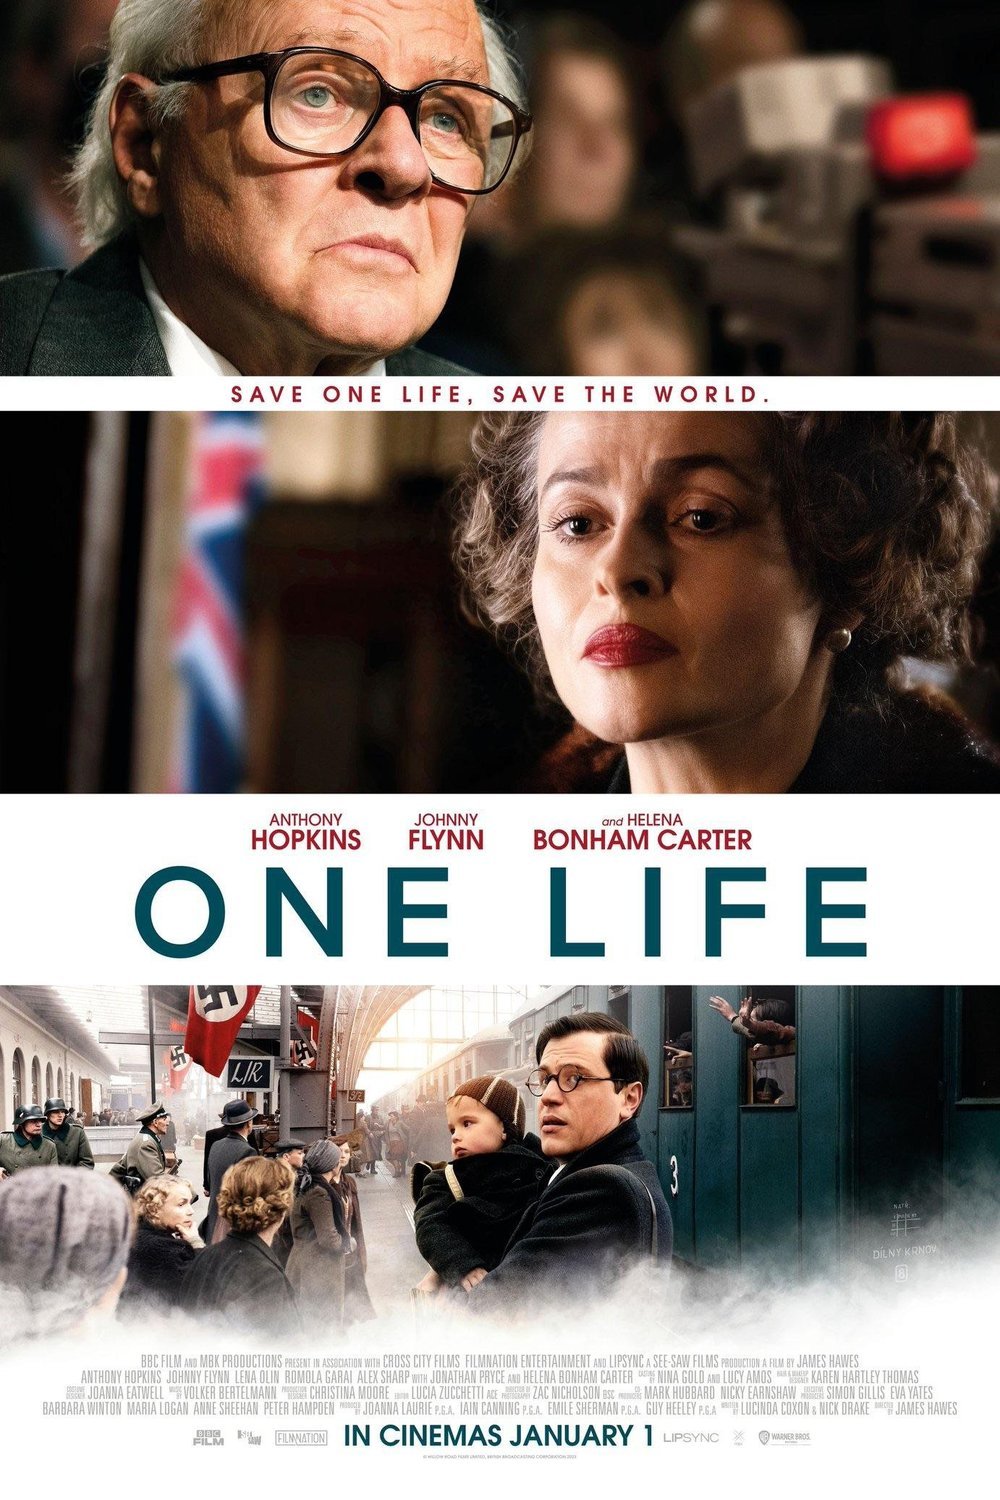 Poster of the movie One Life